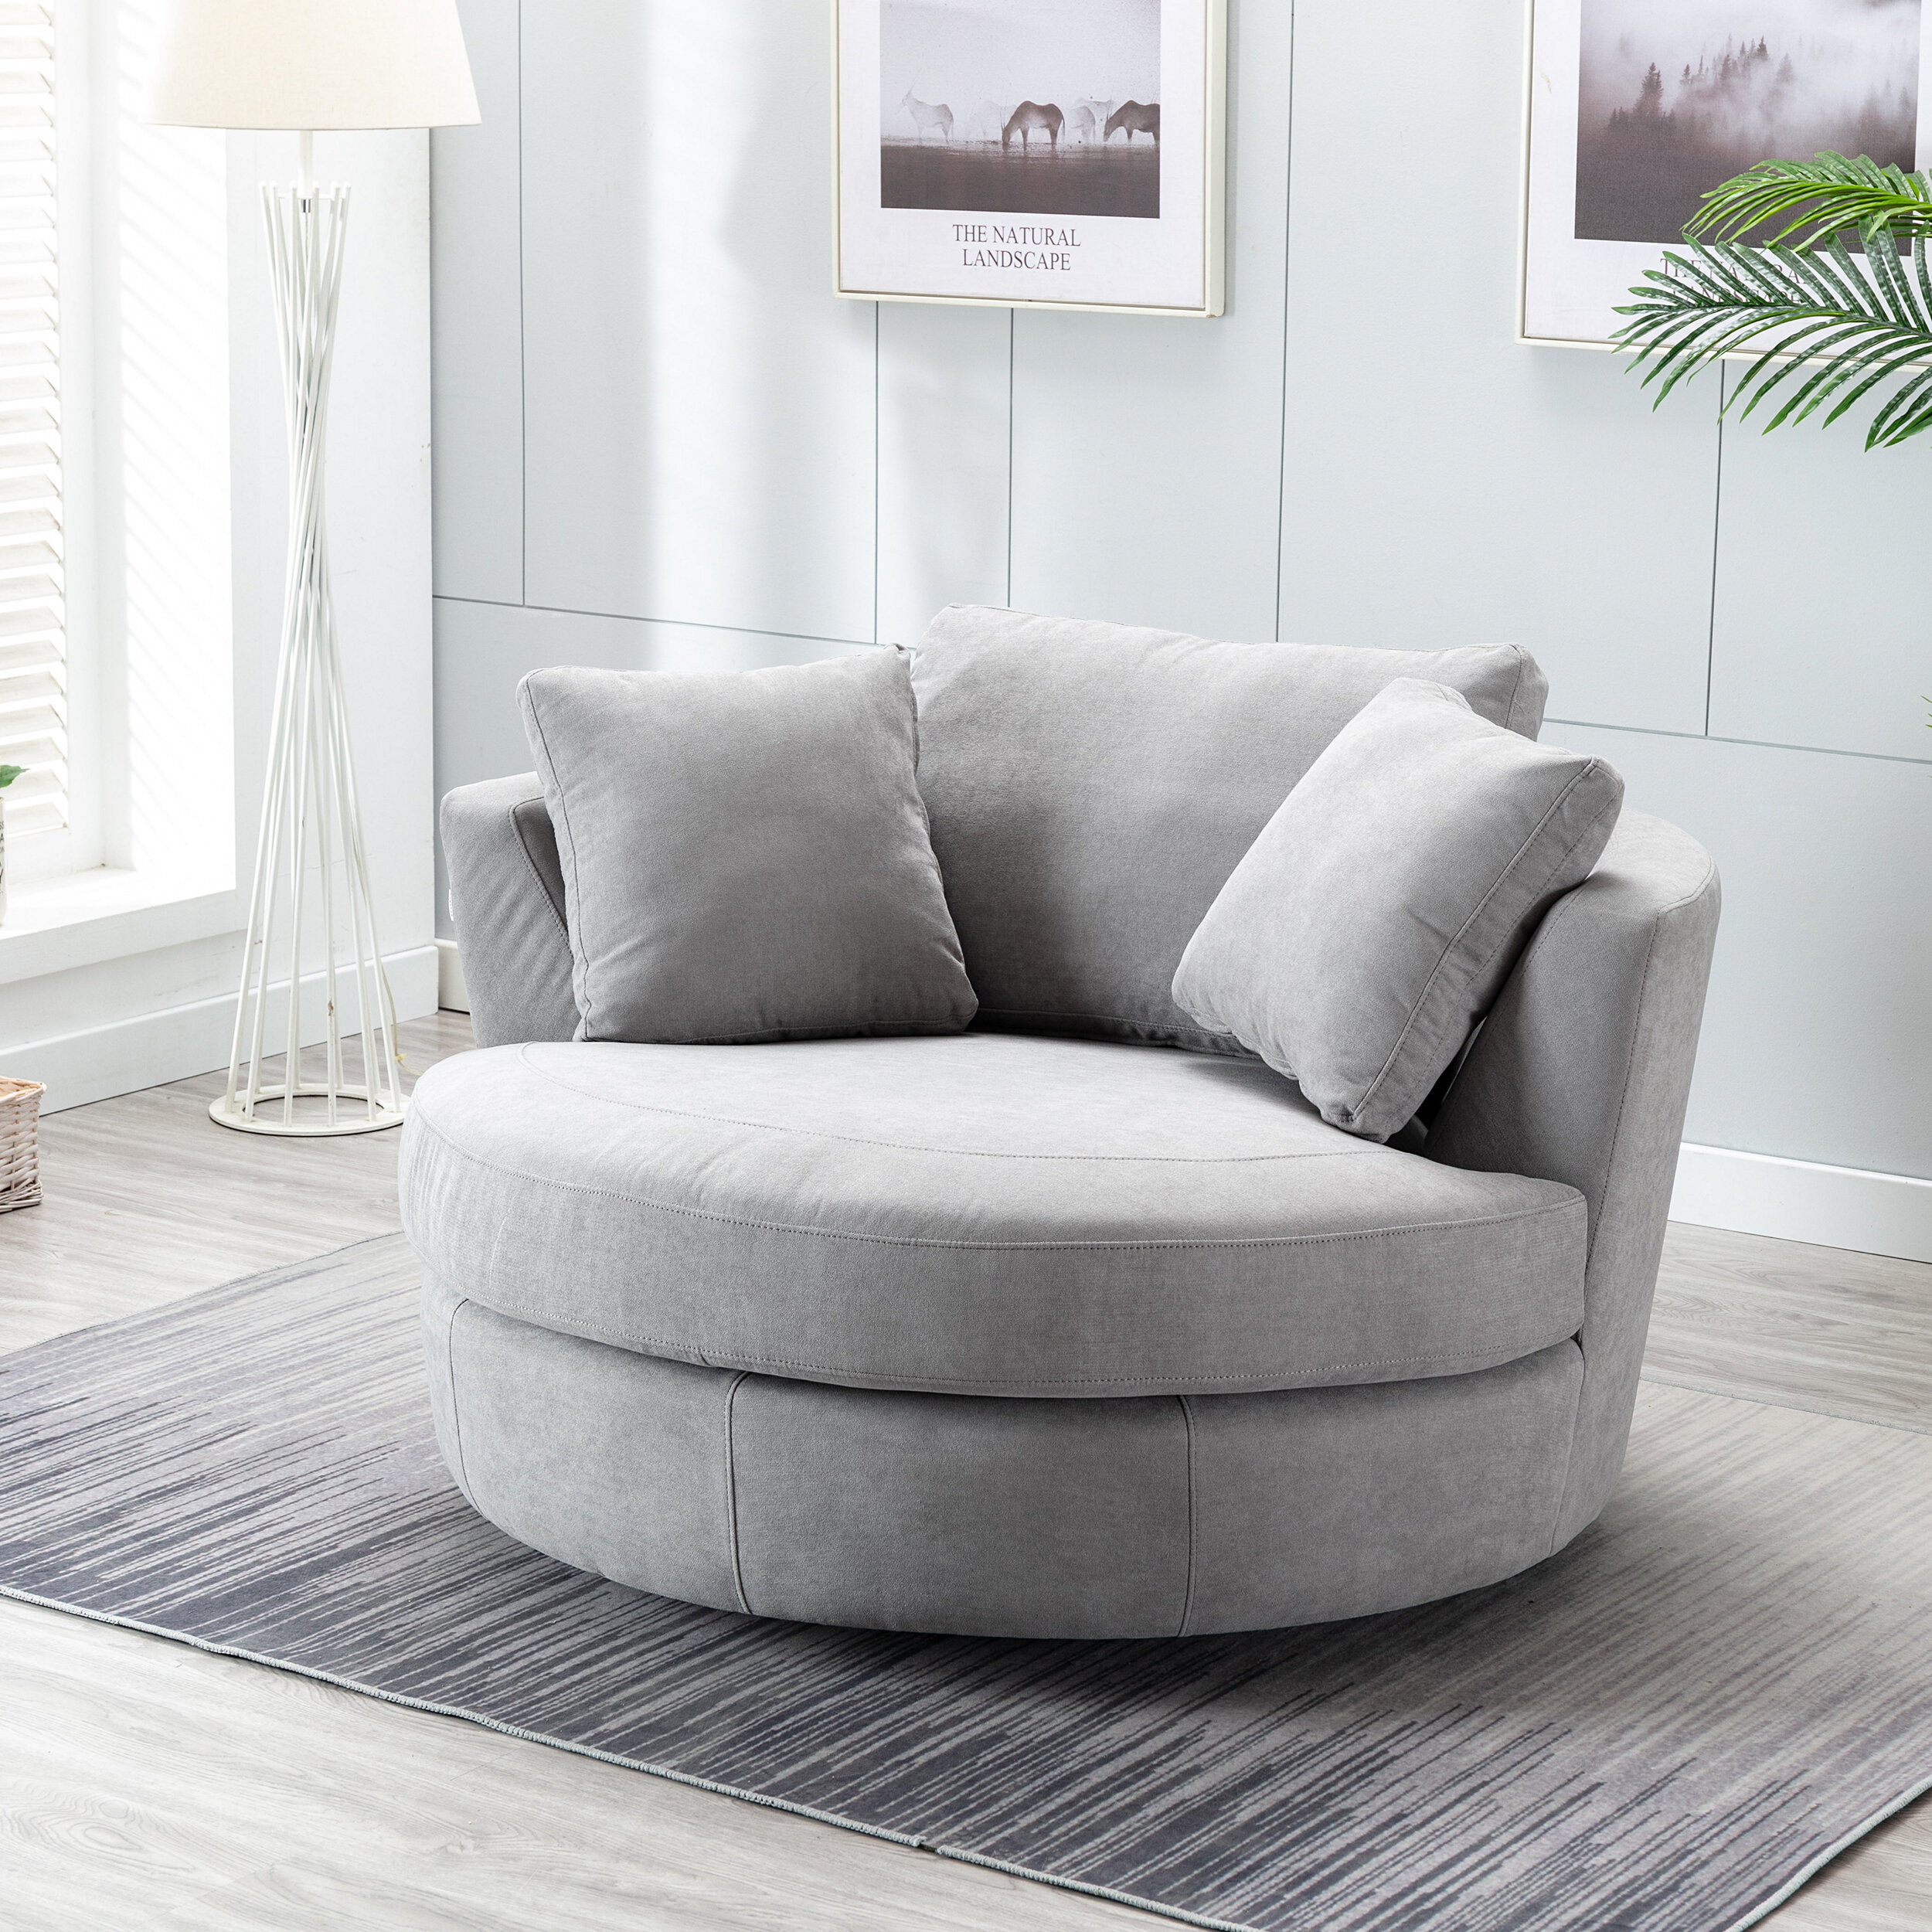 Round Swivel Chair Visualhunt, Oversized Round Swivel Chairs For Living Room